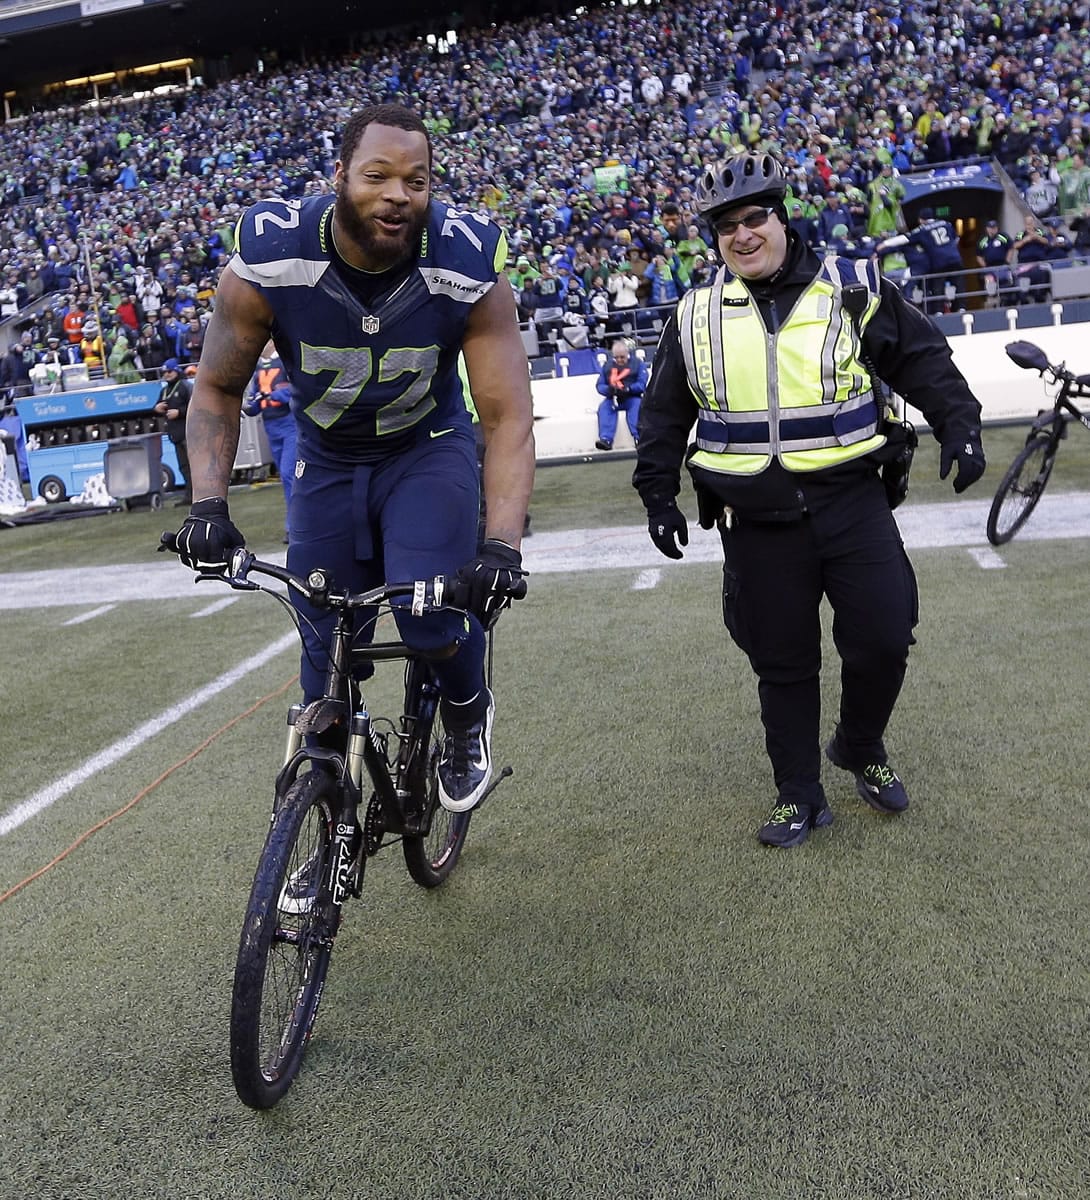 Seattle's Michael Bennett borrows a police officers bike for a celebration lap around CenturyLink Field after winning the NFC Championship game against the Green Bay Packers.